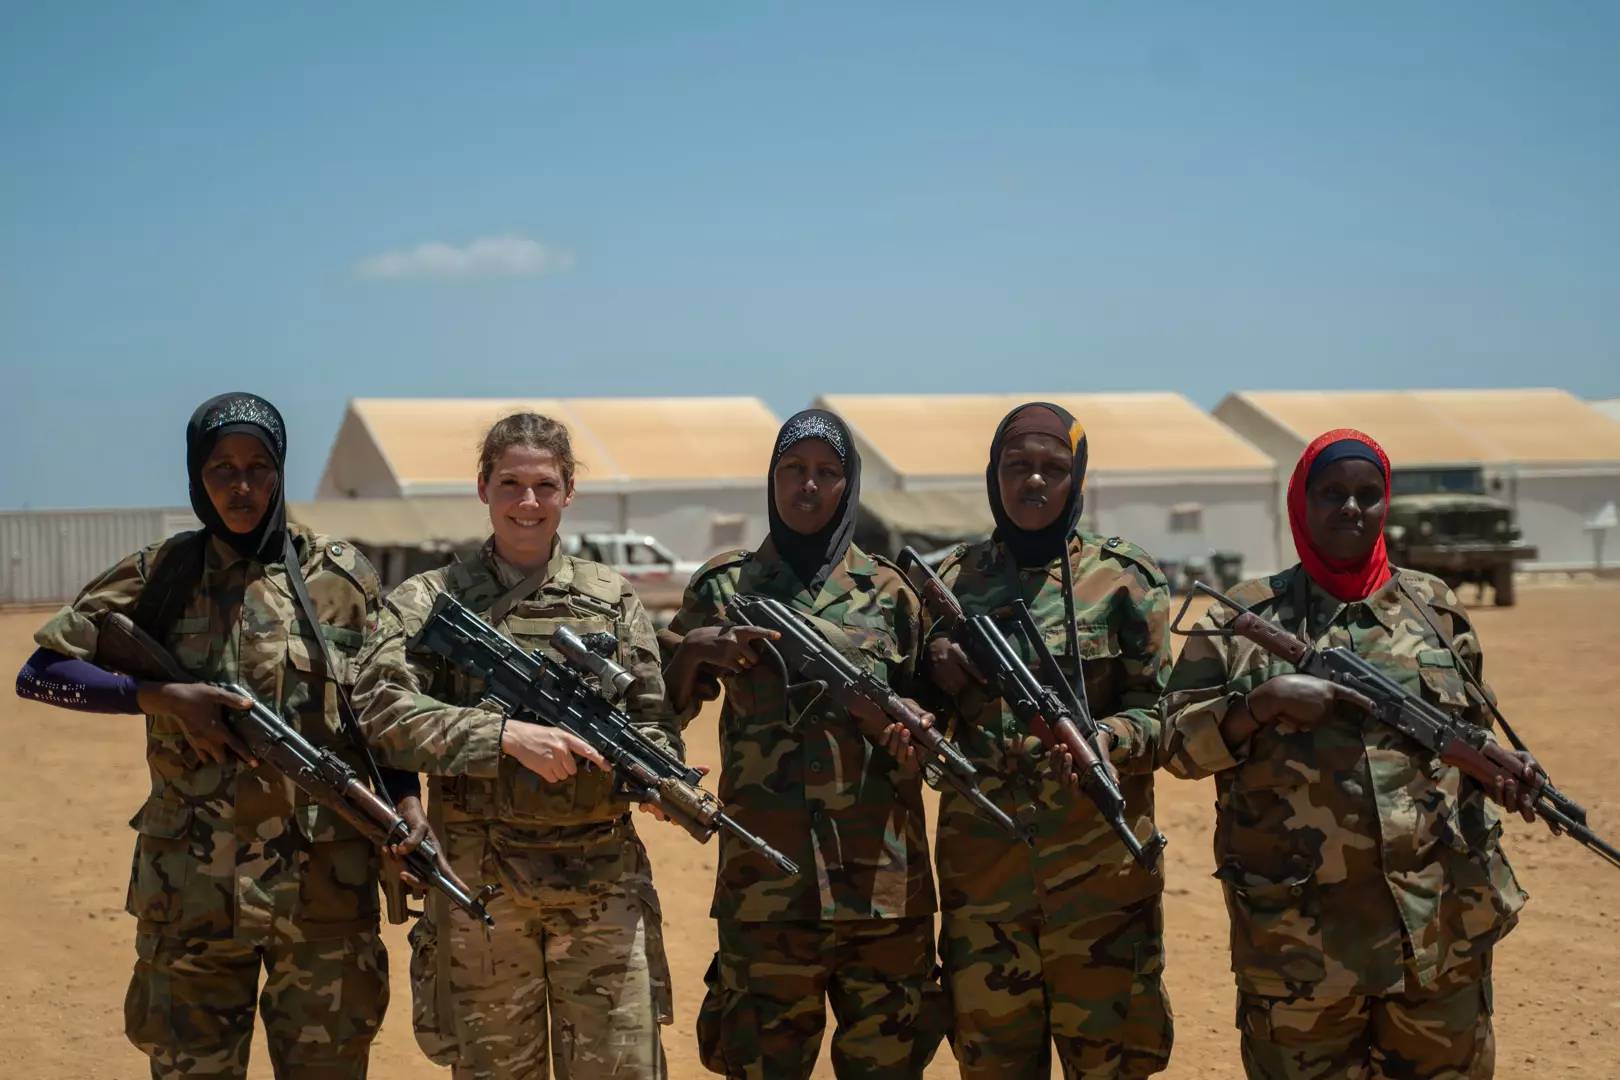 Cpl Sophie Fitzhugh with troops from the Somalian National Army.